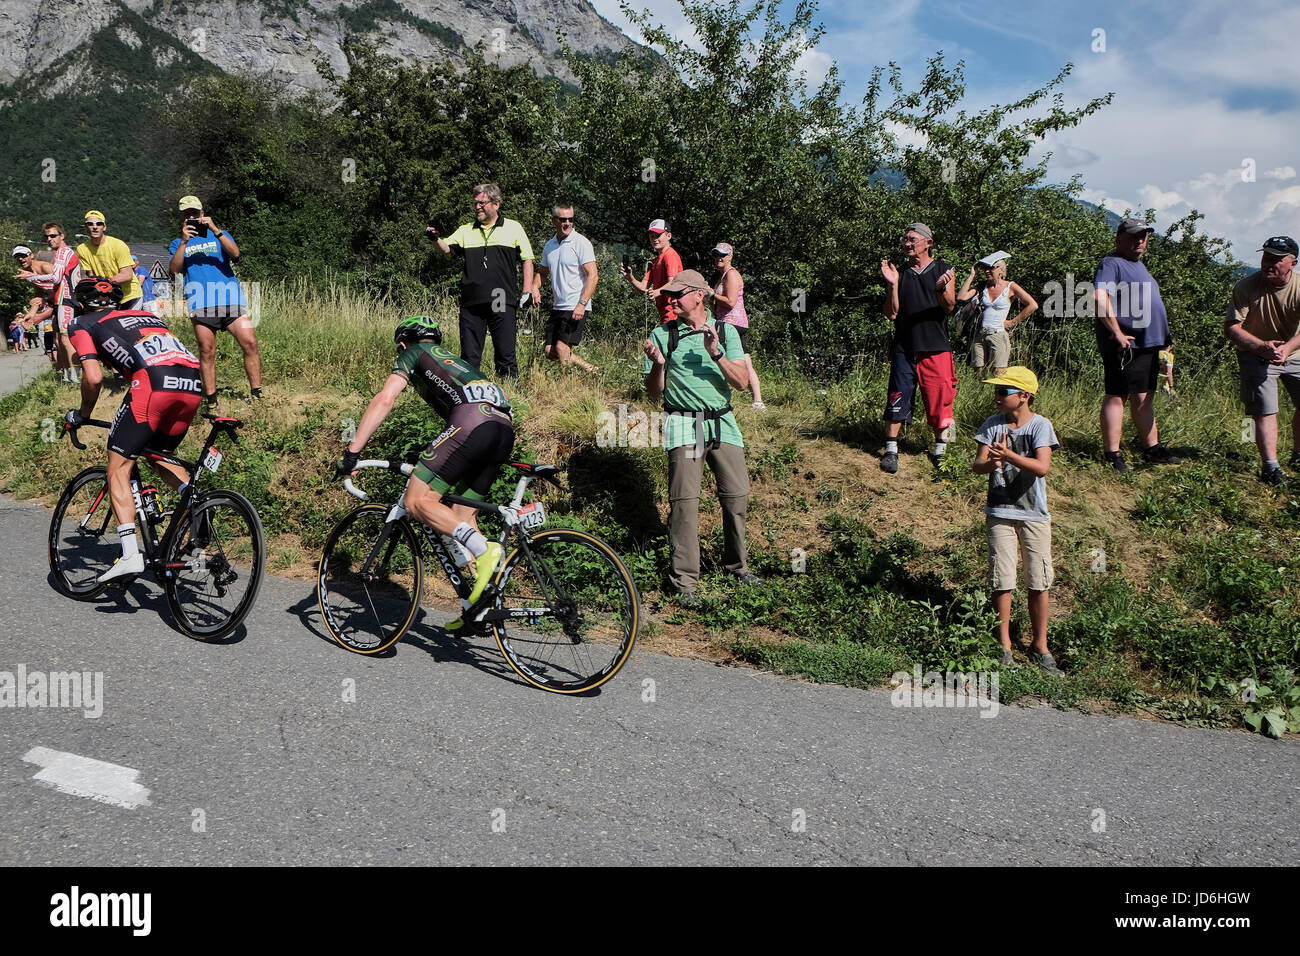 MONTVERNIER, FRANCE - JULY 23, 2015: Damiano Caruso BMC Racing Team and Cyril Gautier team Europcar riding together up the mountain roads at Montverni Stock Photo